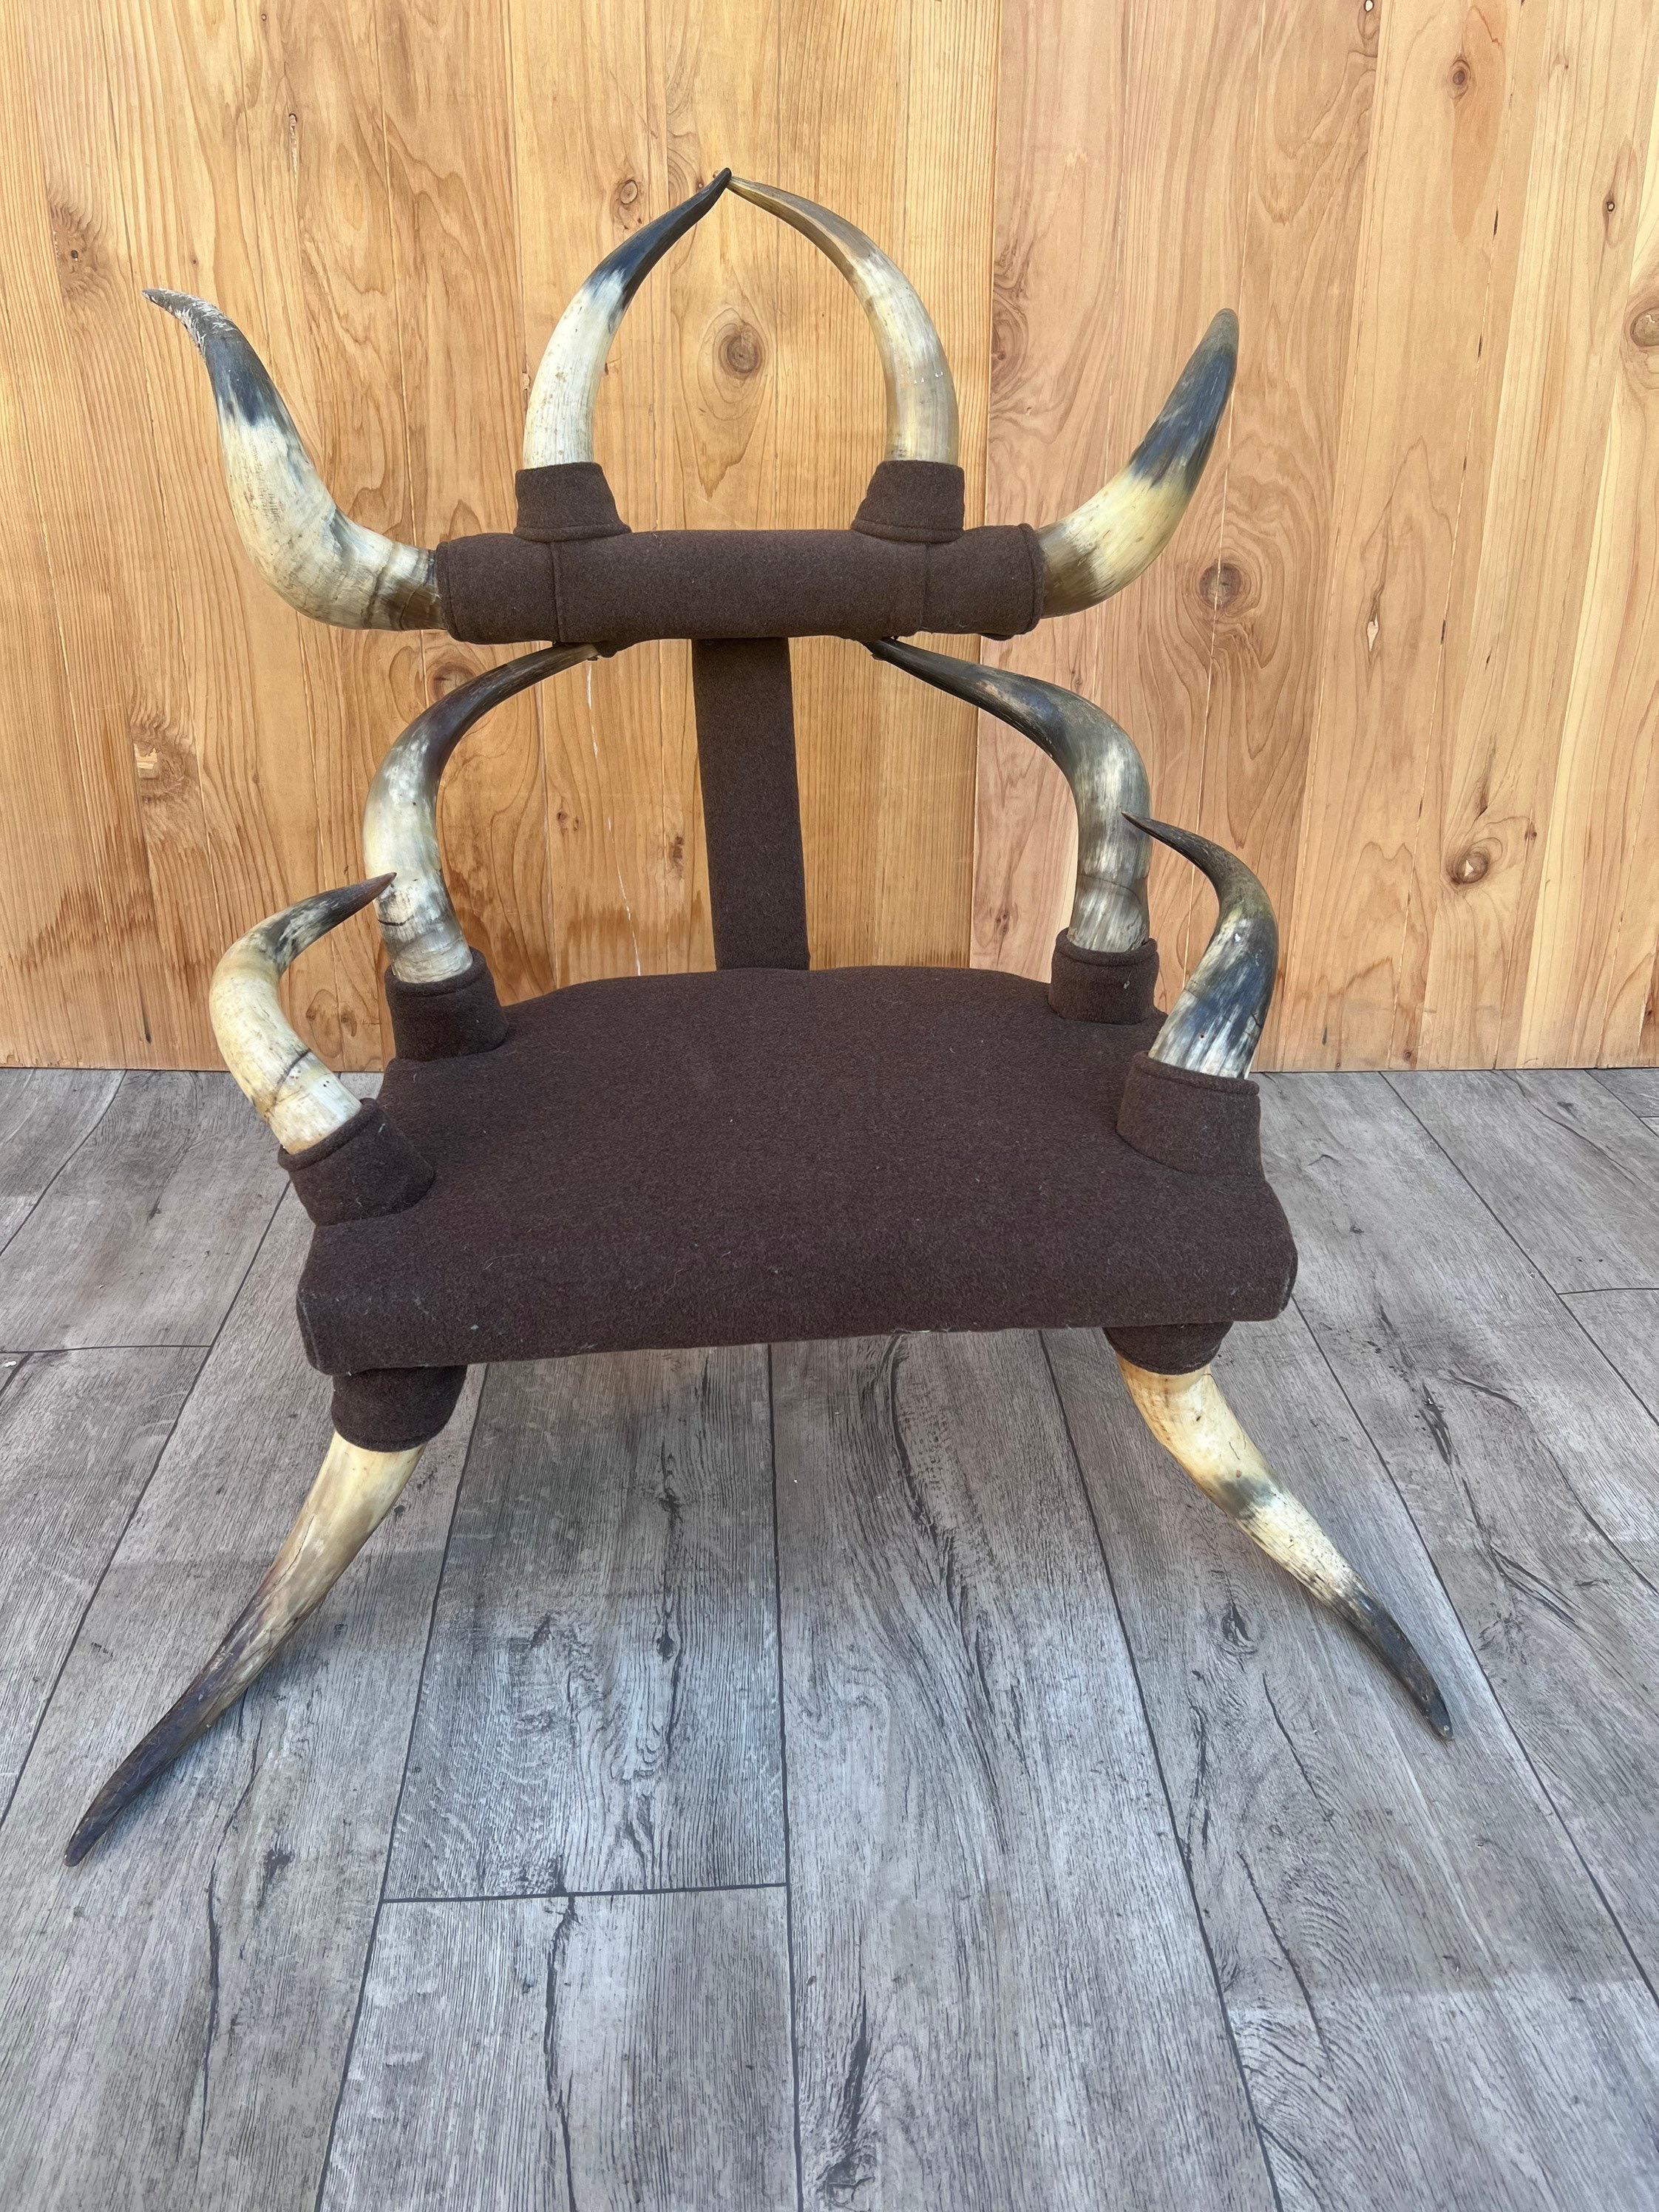 Hand-Carved Antique Steer Horn Child's Chair with Ottoman in Original Upholstery - Set of 2